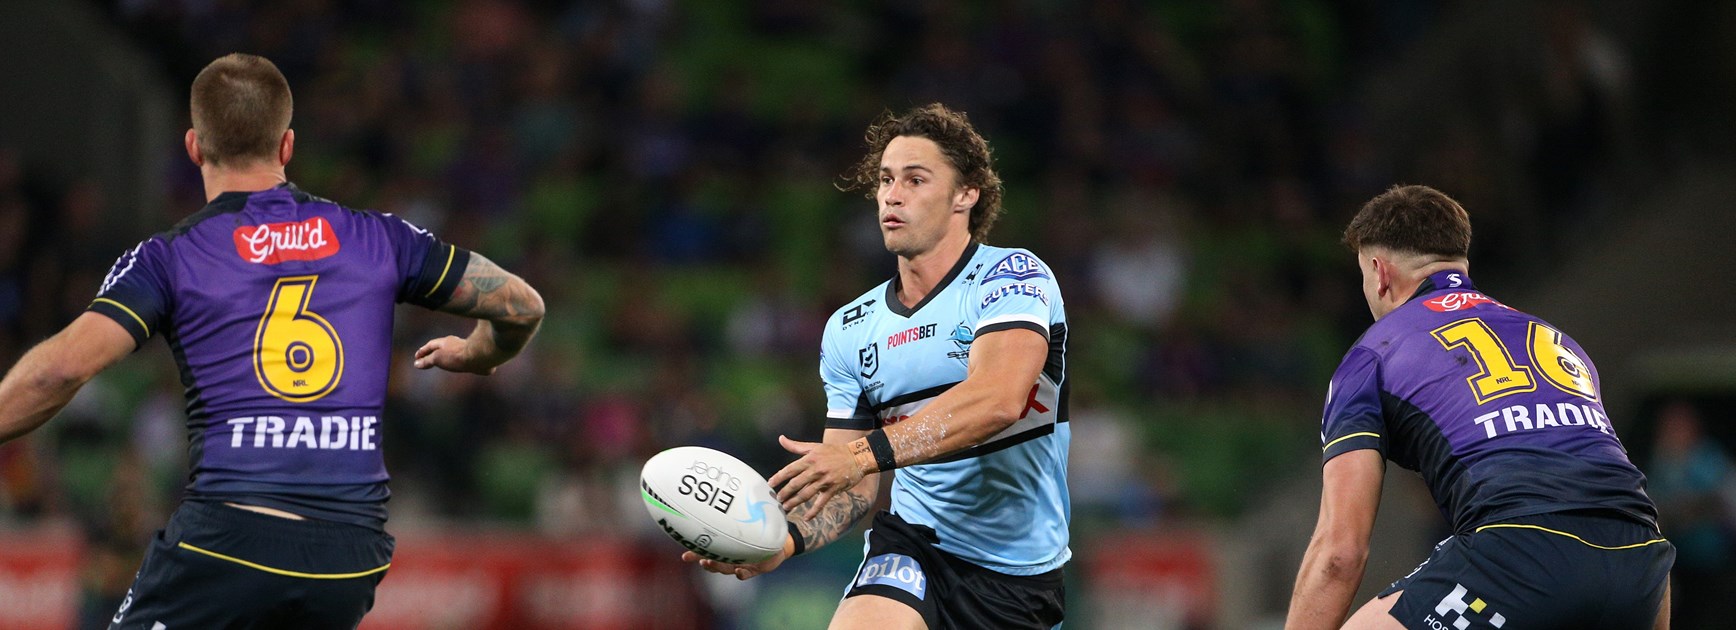 Munster magic leads Storm to win over Sharks